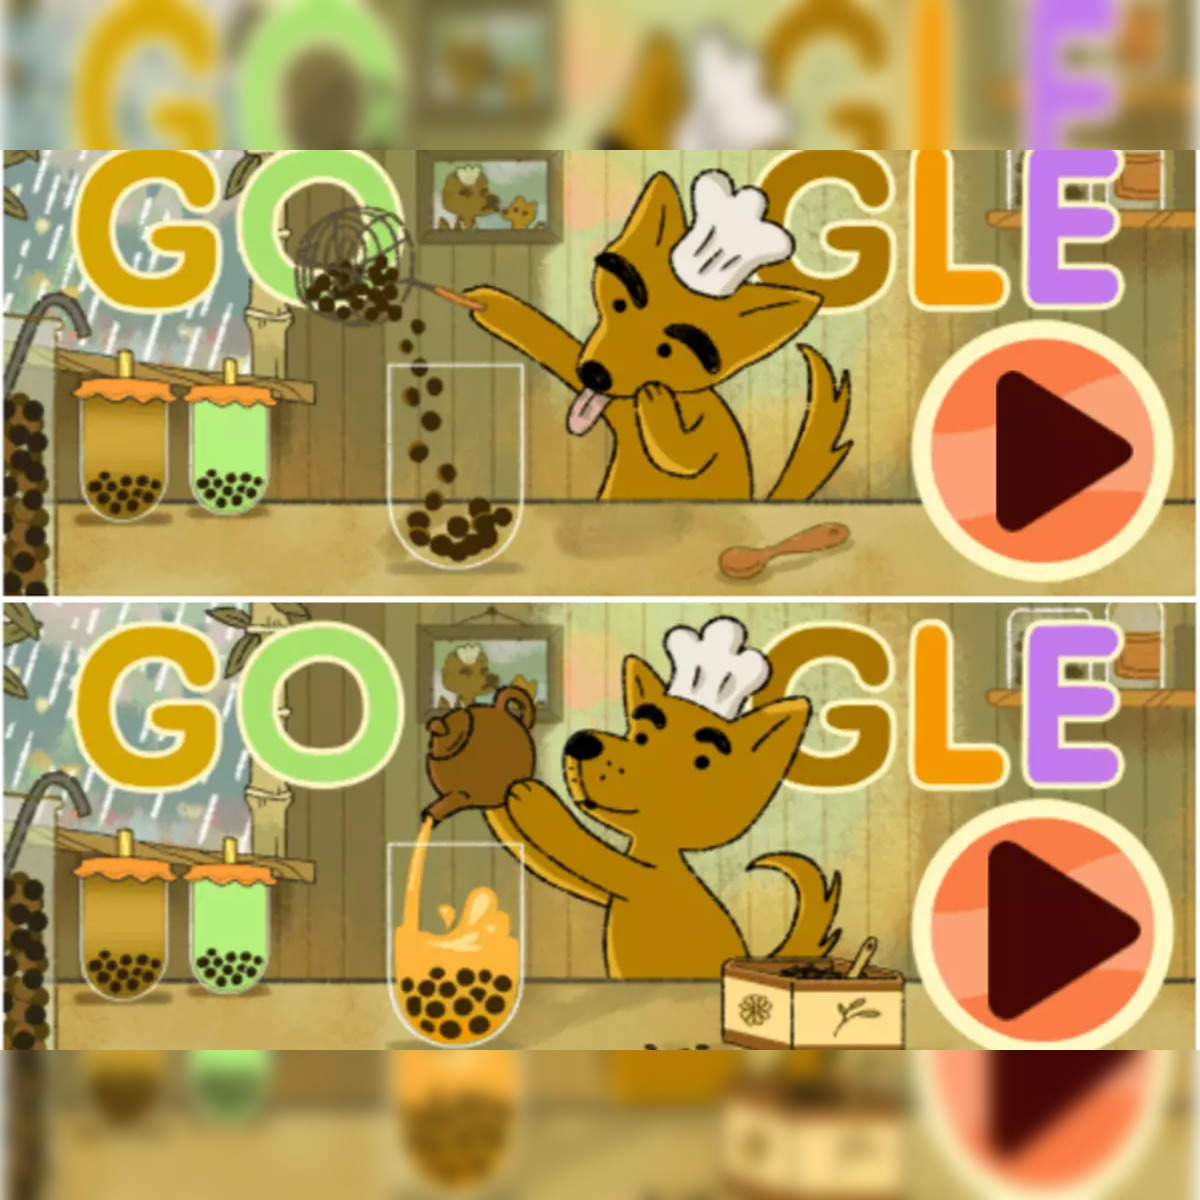 Google brings back popular Doodle games: Here's how to play